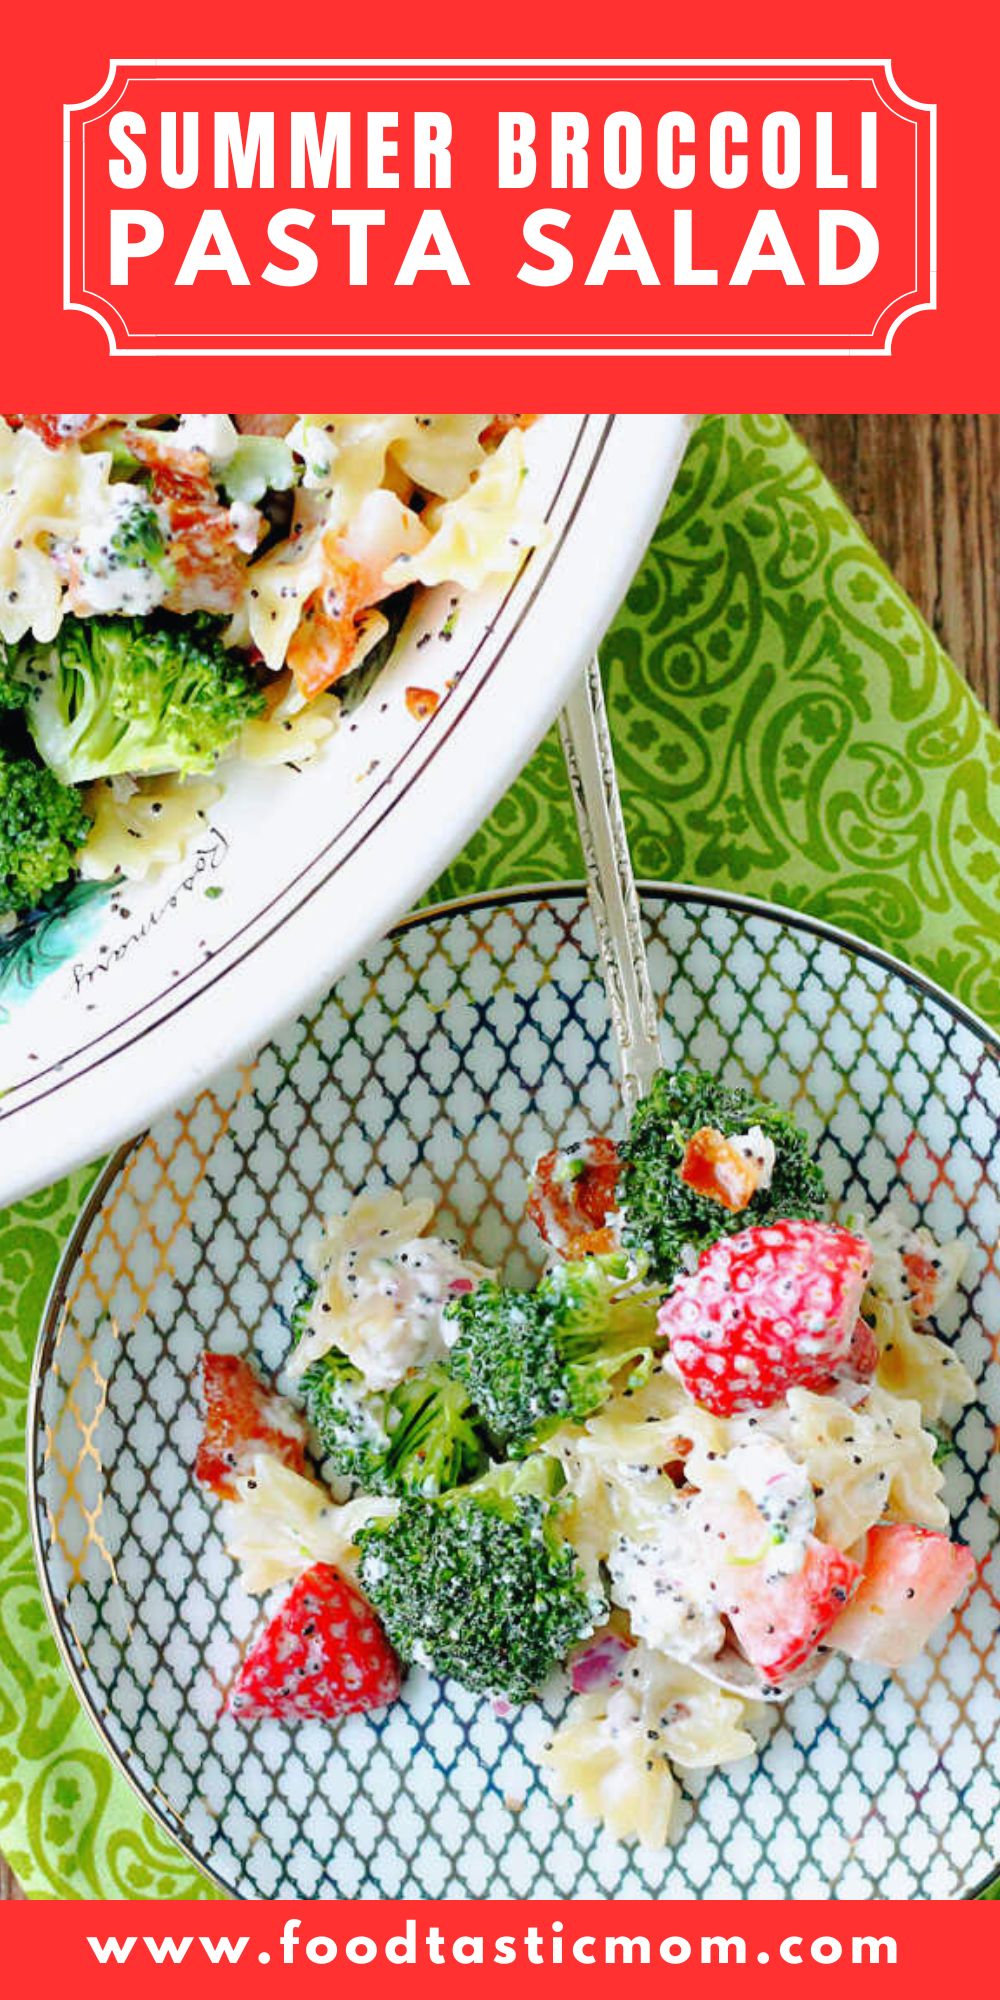 Summer Broccoli Pasta Salad is a terrific take-along dish with a perfect balance of sweet and savory flavors including strawberries and bacon. via @foodtasticmom